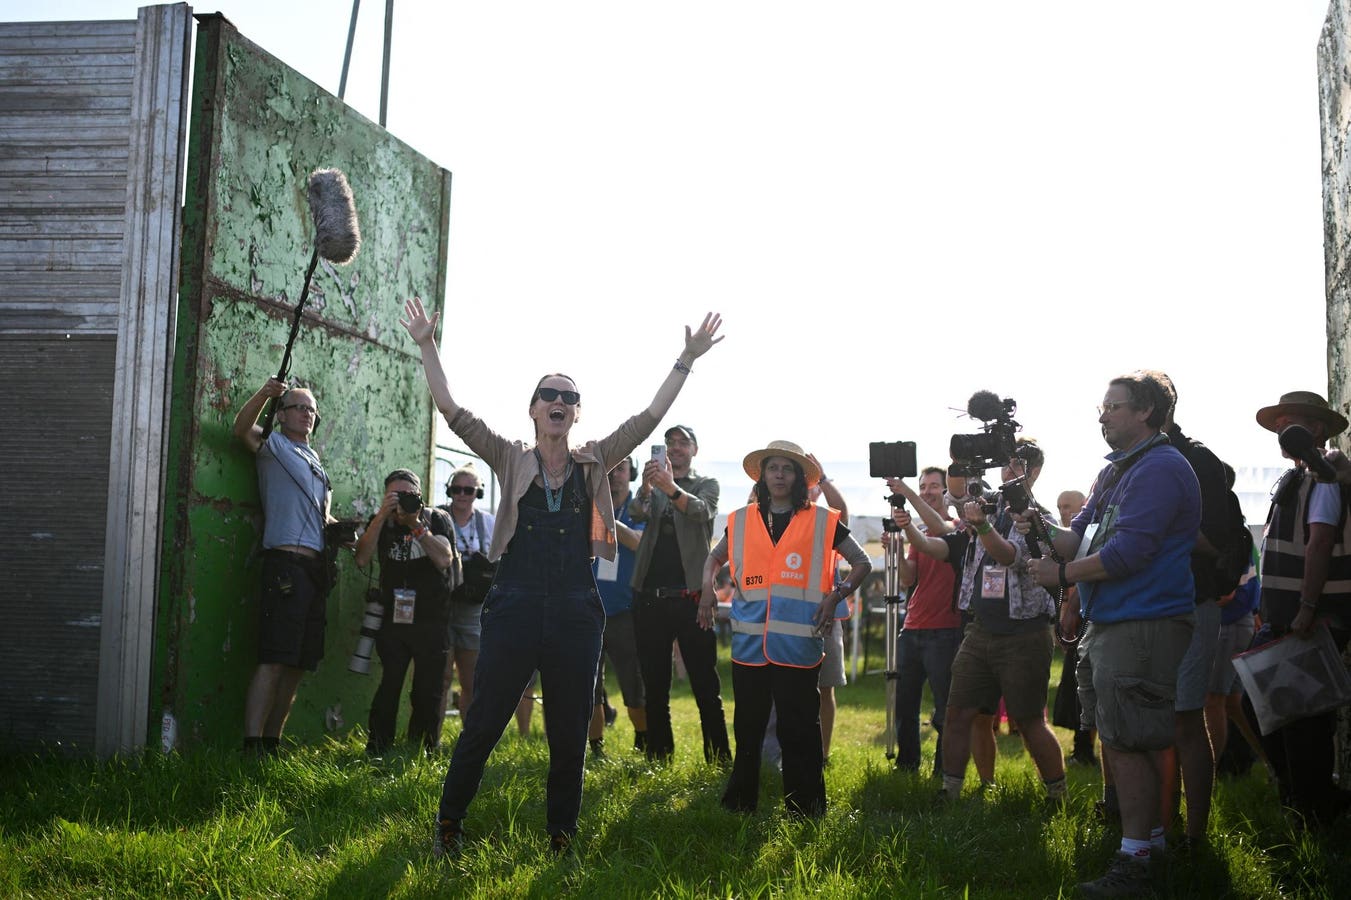 With 200,000 Expected, Emily Eavis Opens The 54th Glastonbury Festival